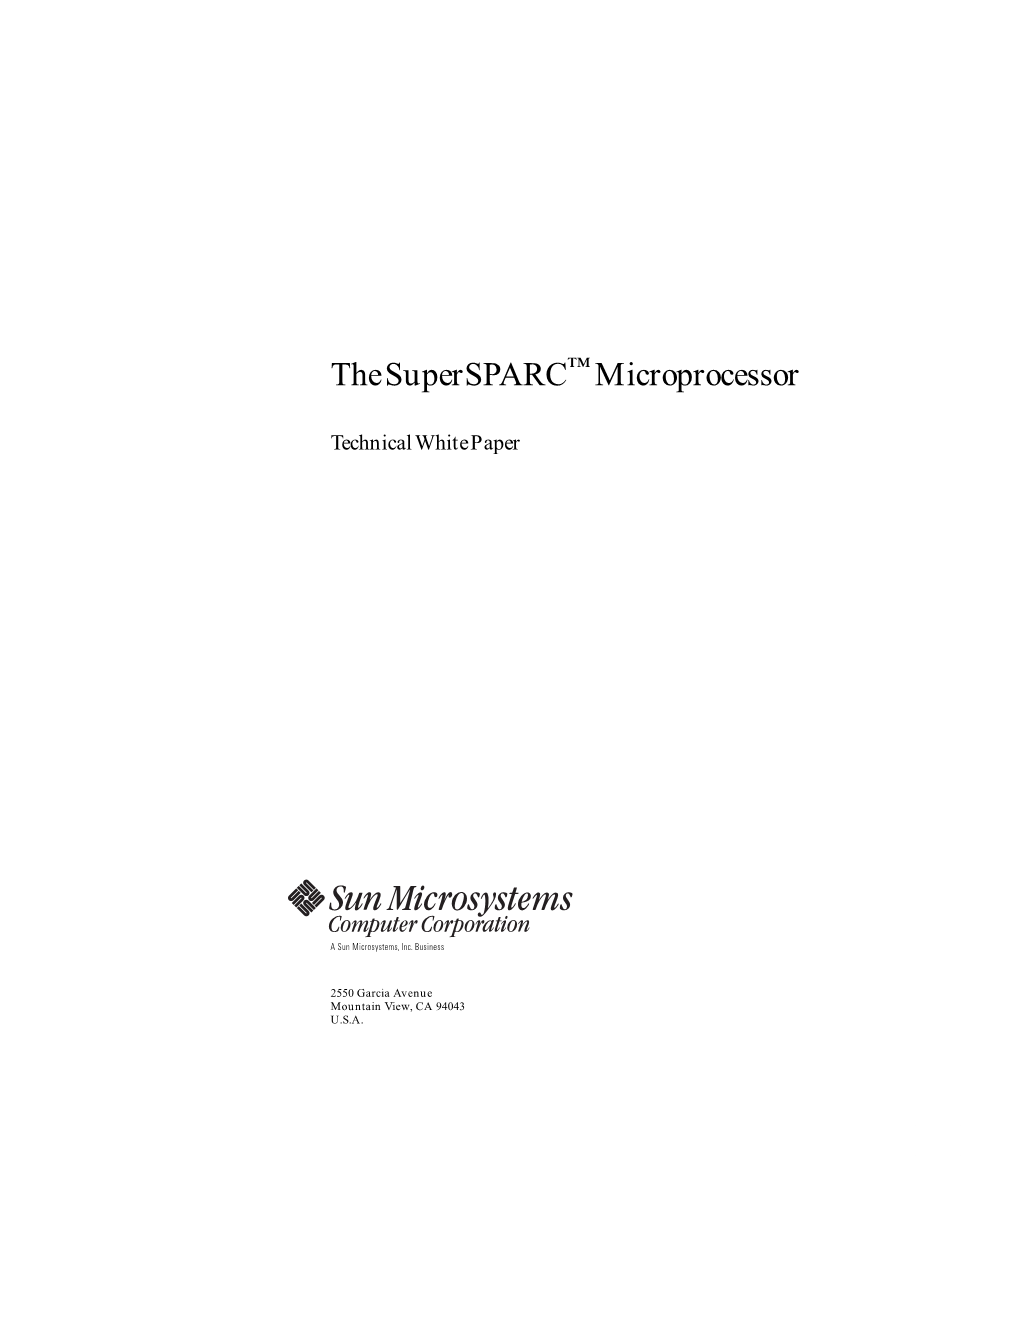 The Supersparc Microprocessor